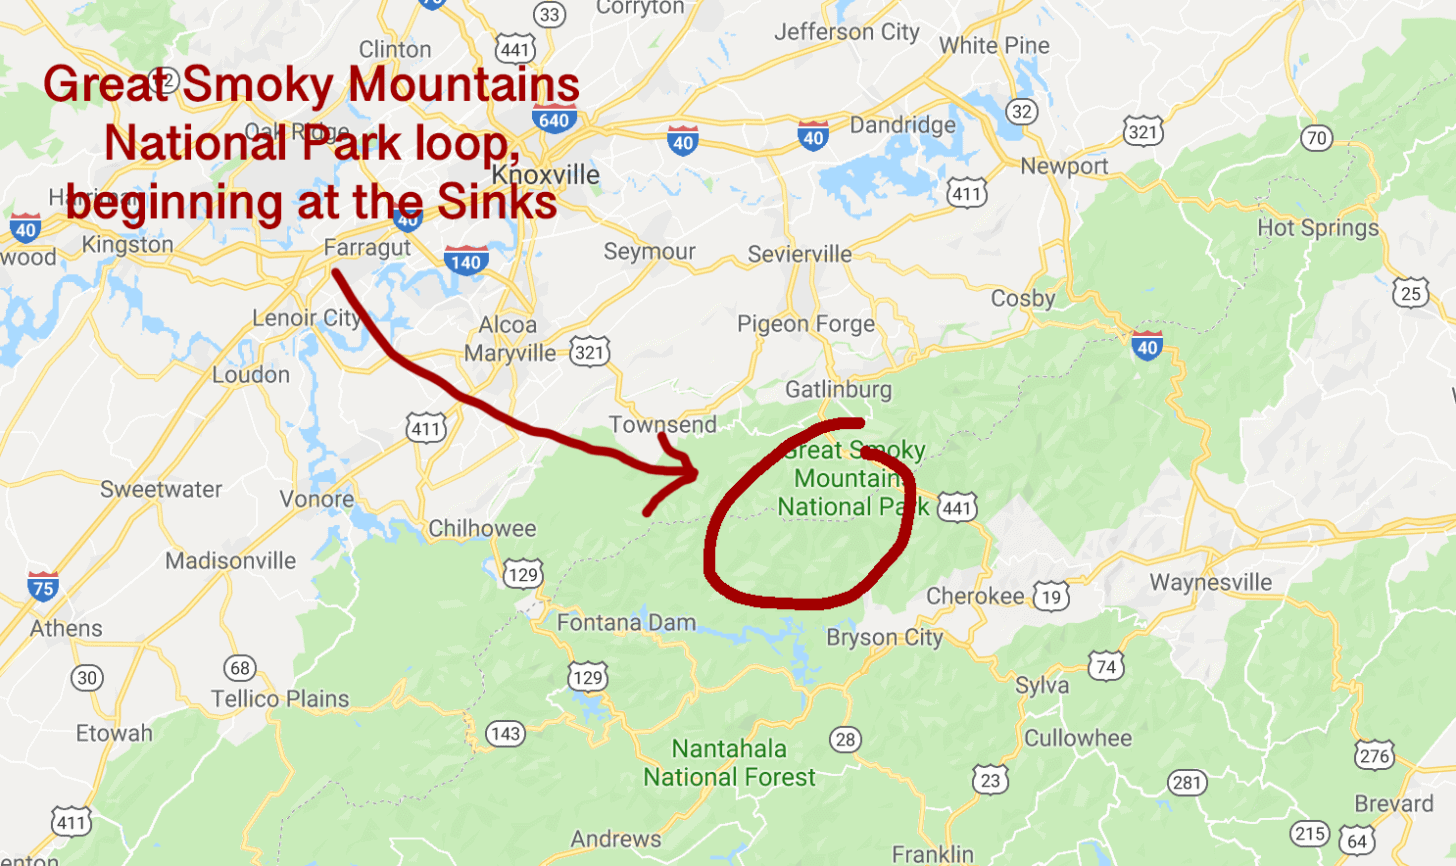 Great Smoky Mountains Backpacking Loop (Sinks-Little Tennessee River ... - Trip Report Great Smoky Mountains Loop 1 1456x866